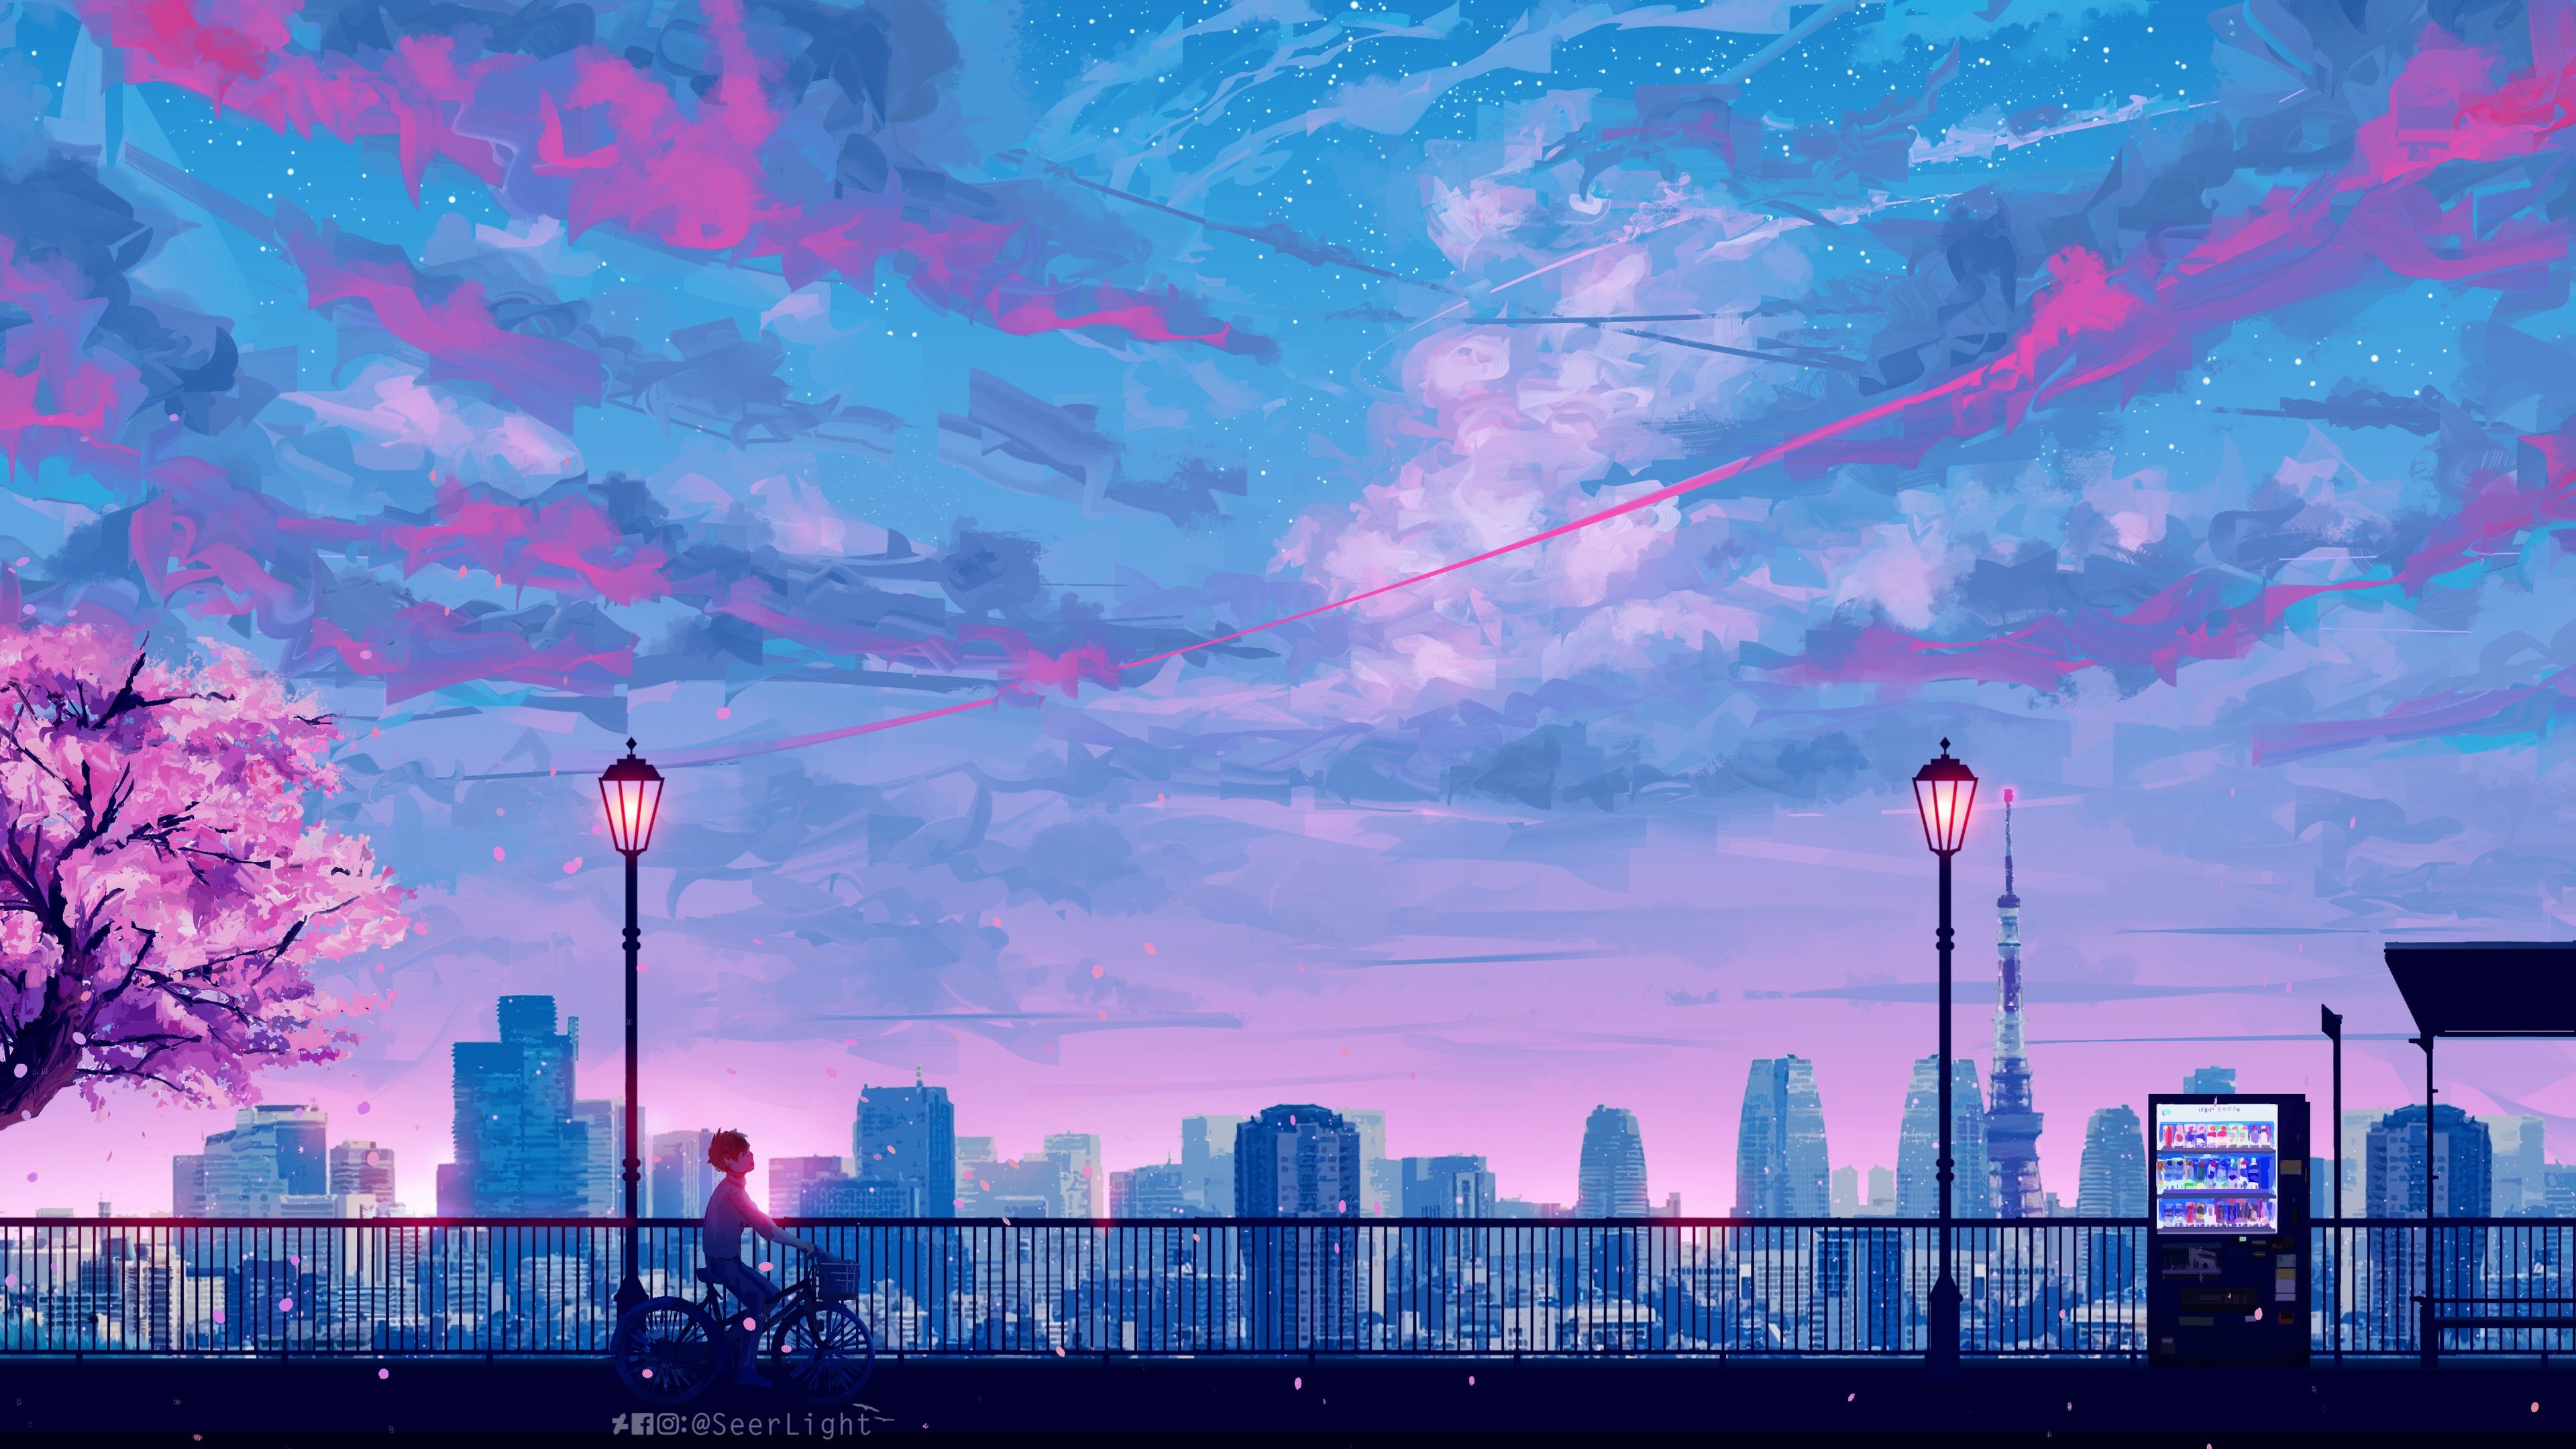 A painting of people on the street at night - Desktop, 90s anime, 90s, landscape, Tokyo, anime sunset, computer, HD, Japan, violet